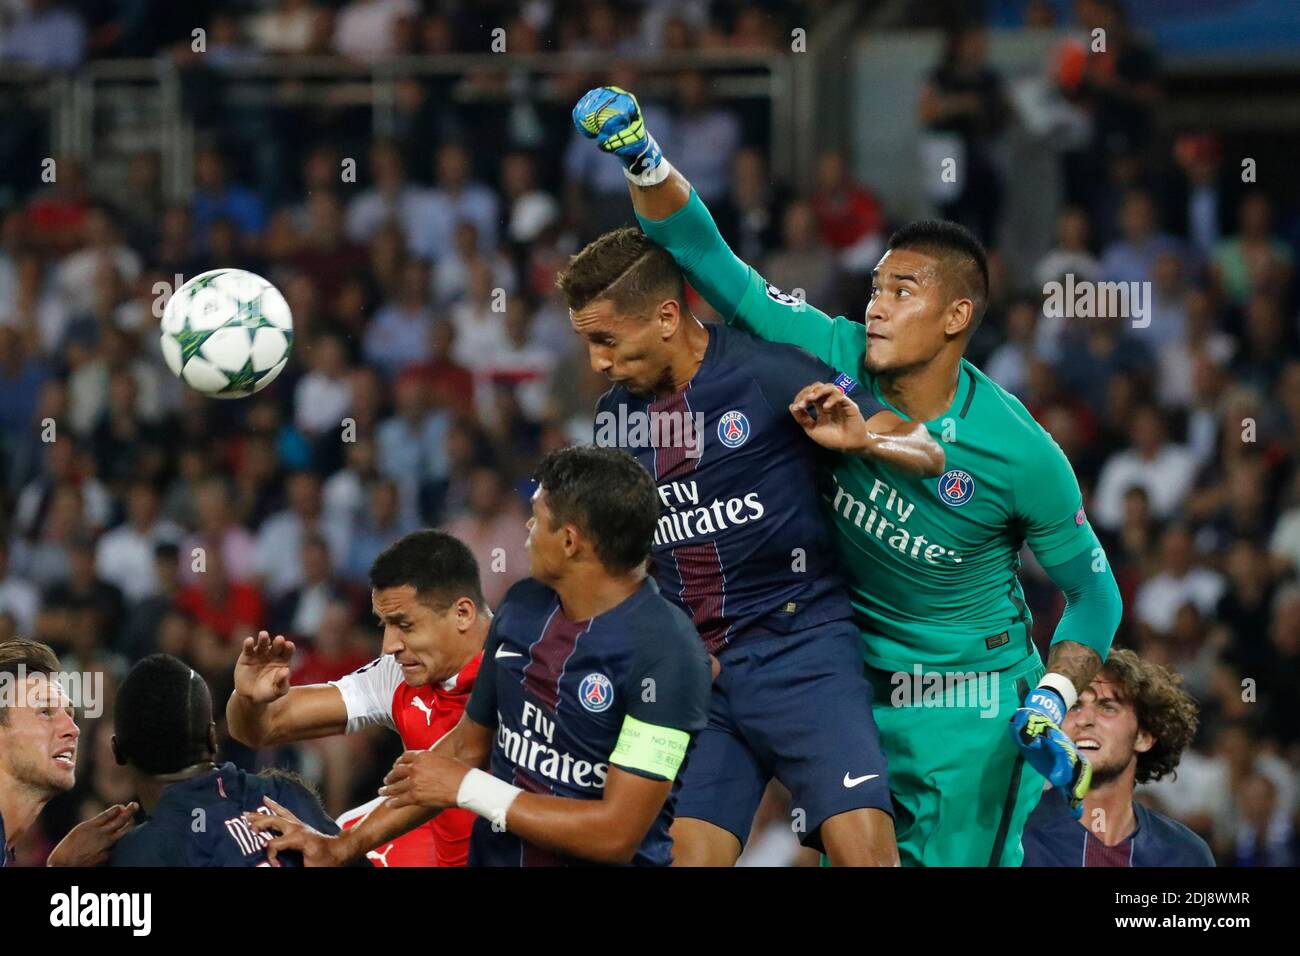 PSG's Alphonse Areola, Marquinhos and Thiago Silva during the Champion's League Group A Paris-St-Germain v Arsenal match at the Parc des Princes stadium in Paris, France, on September 13, 2016. The match ended in a 1-1 draw. Photo by Henri Szwarc/ABACAPRESS.COM Stock Photo